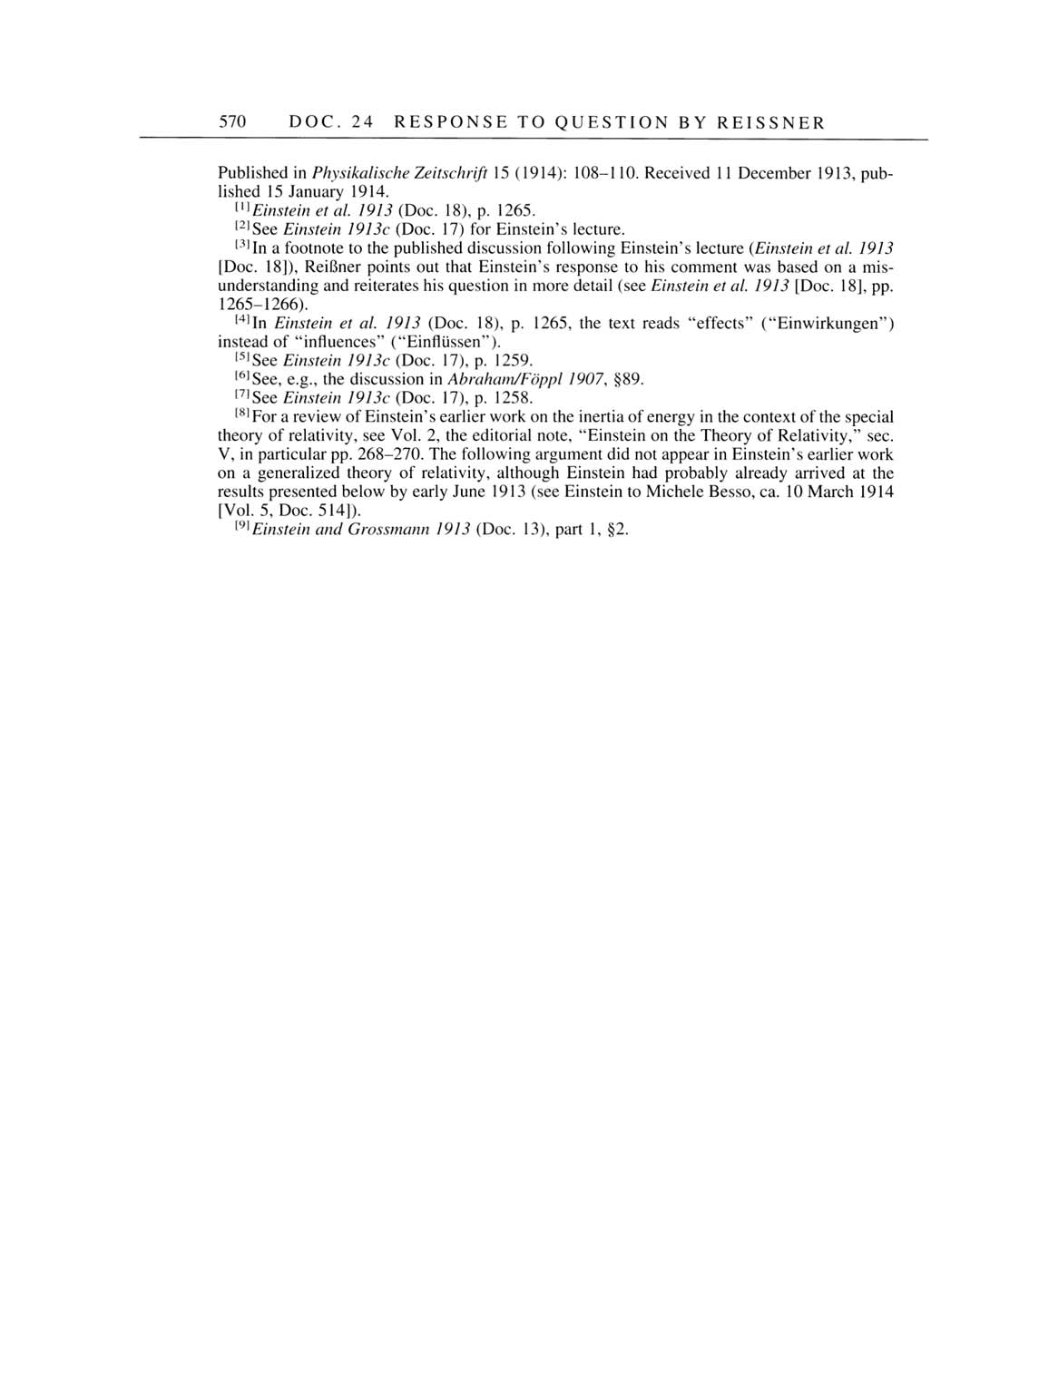 Volume 4: The Swiss Years: Writings 1912-1914 page 570